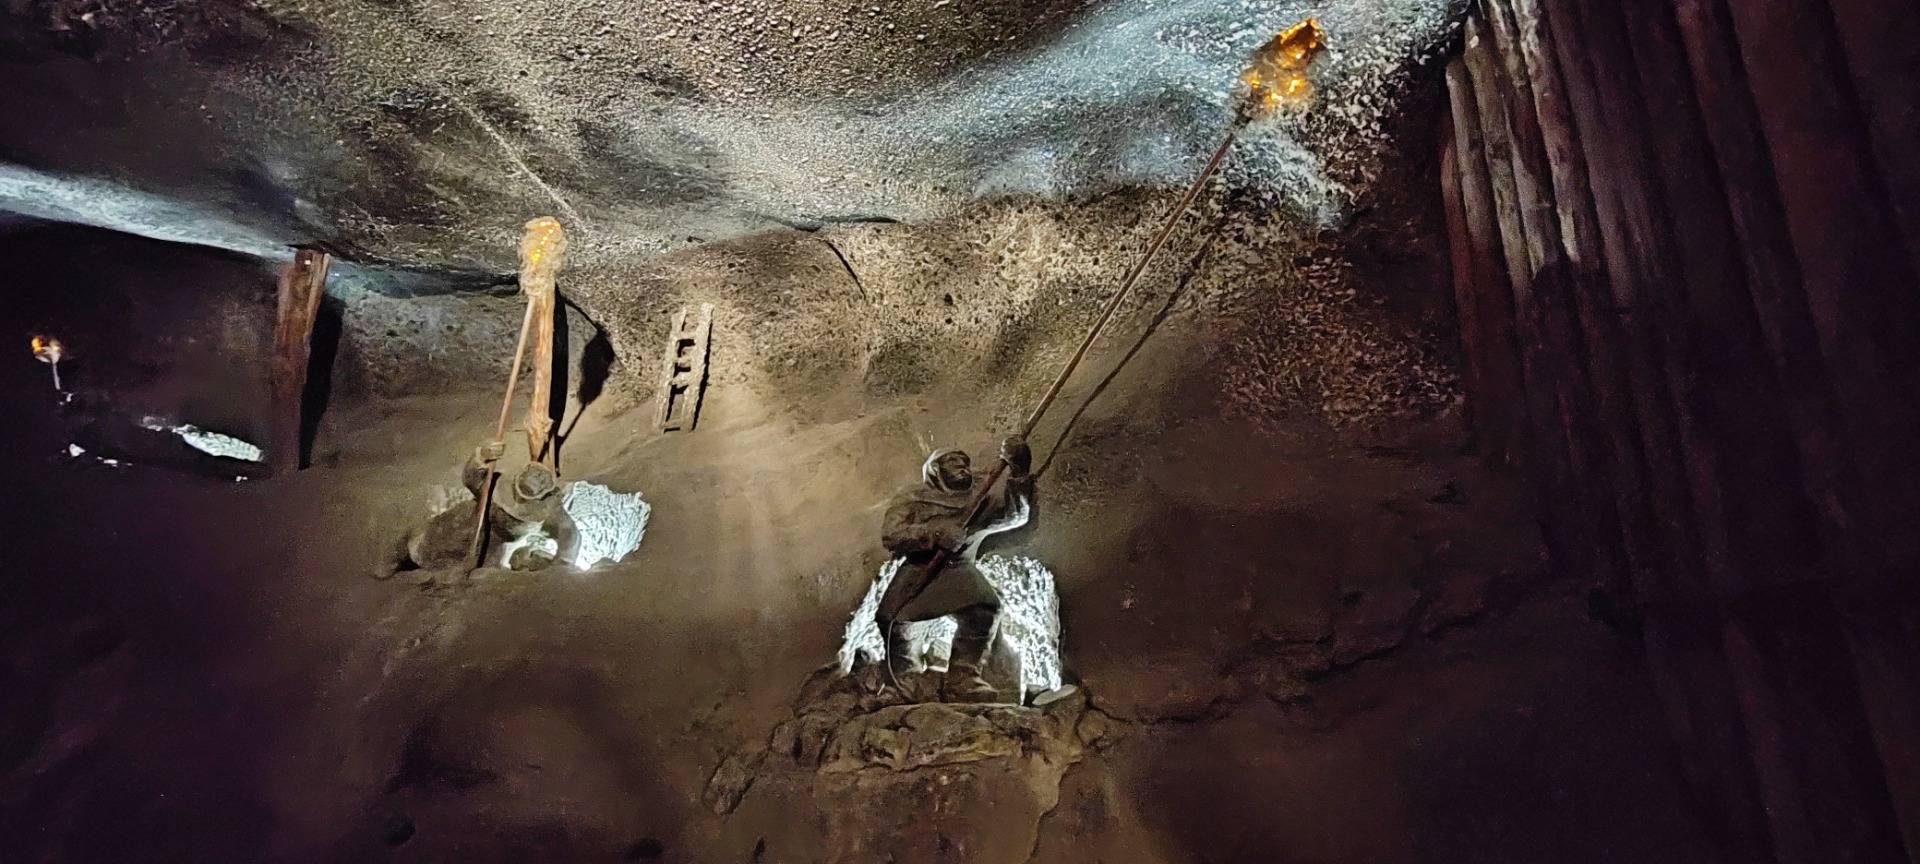 This miner is burning gases out of the cave